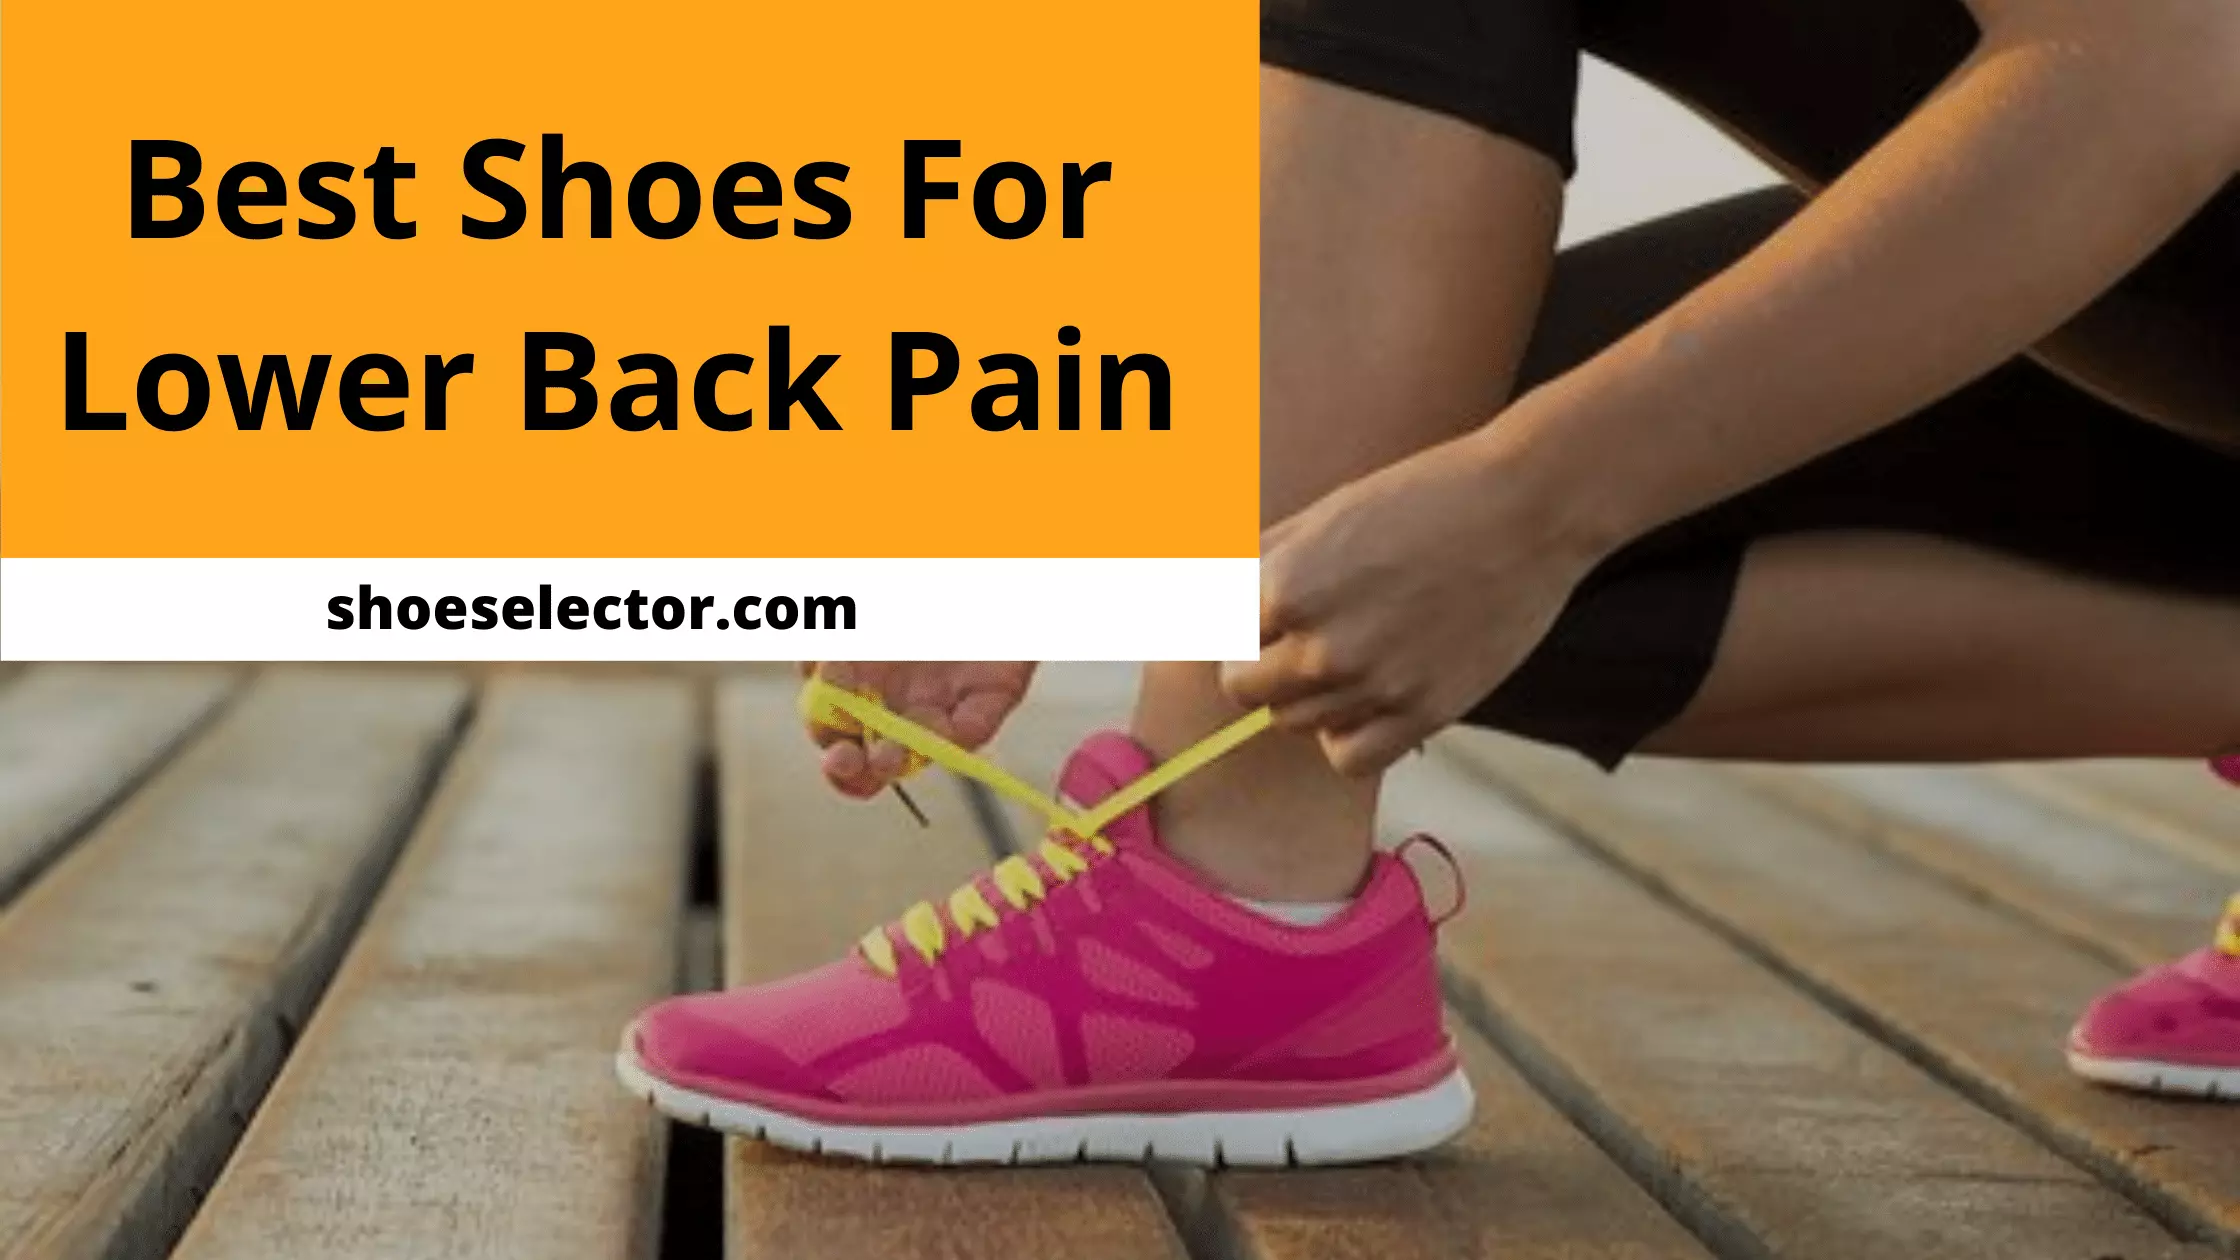 Best Shoes For Lower Back Pain - Tested And Reviewed